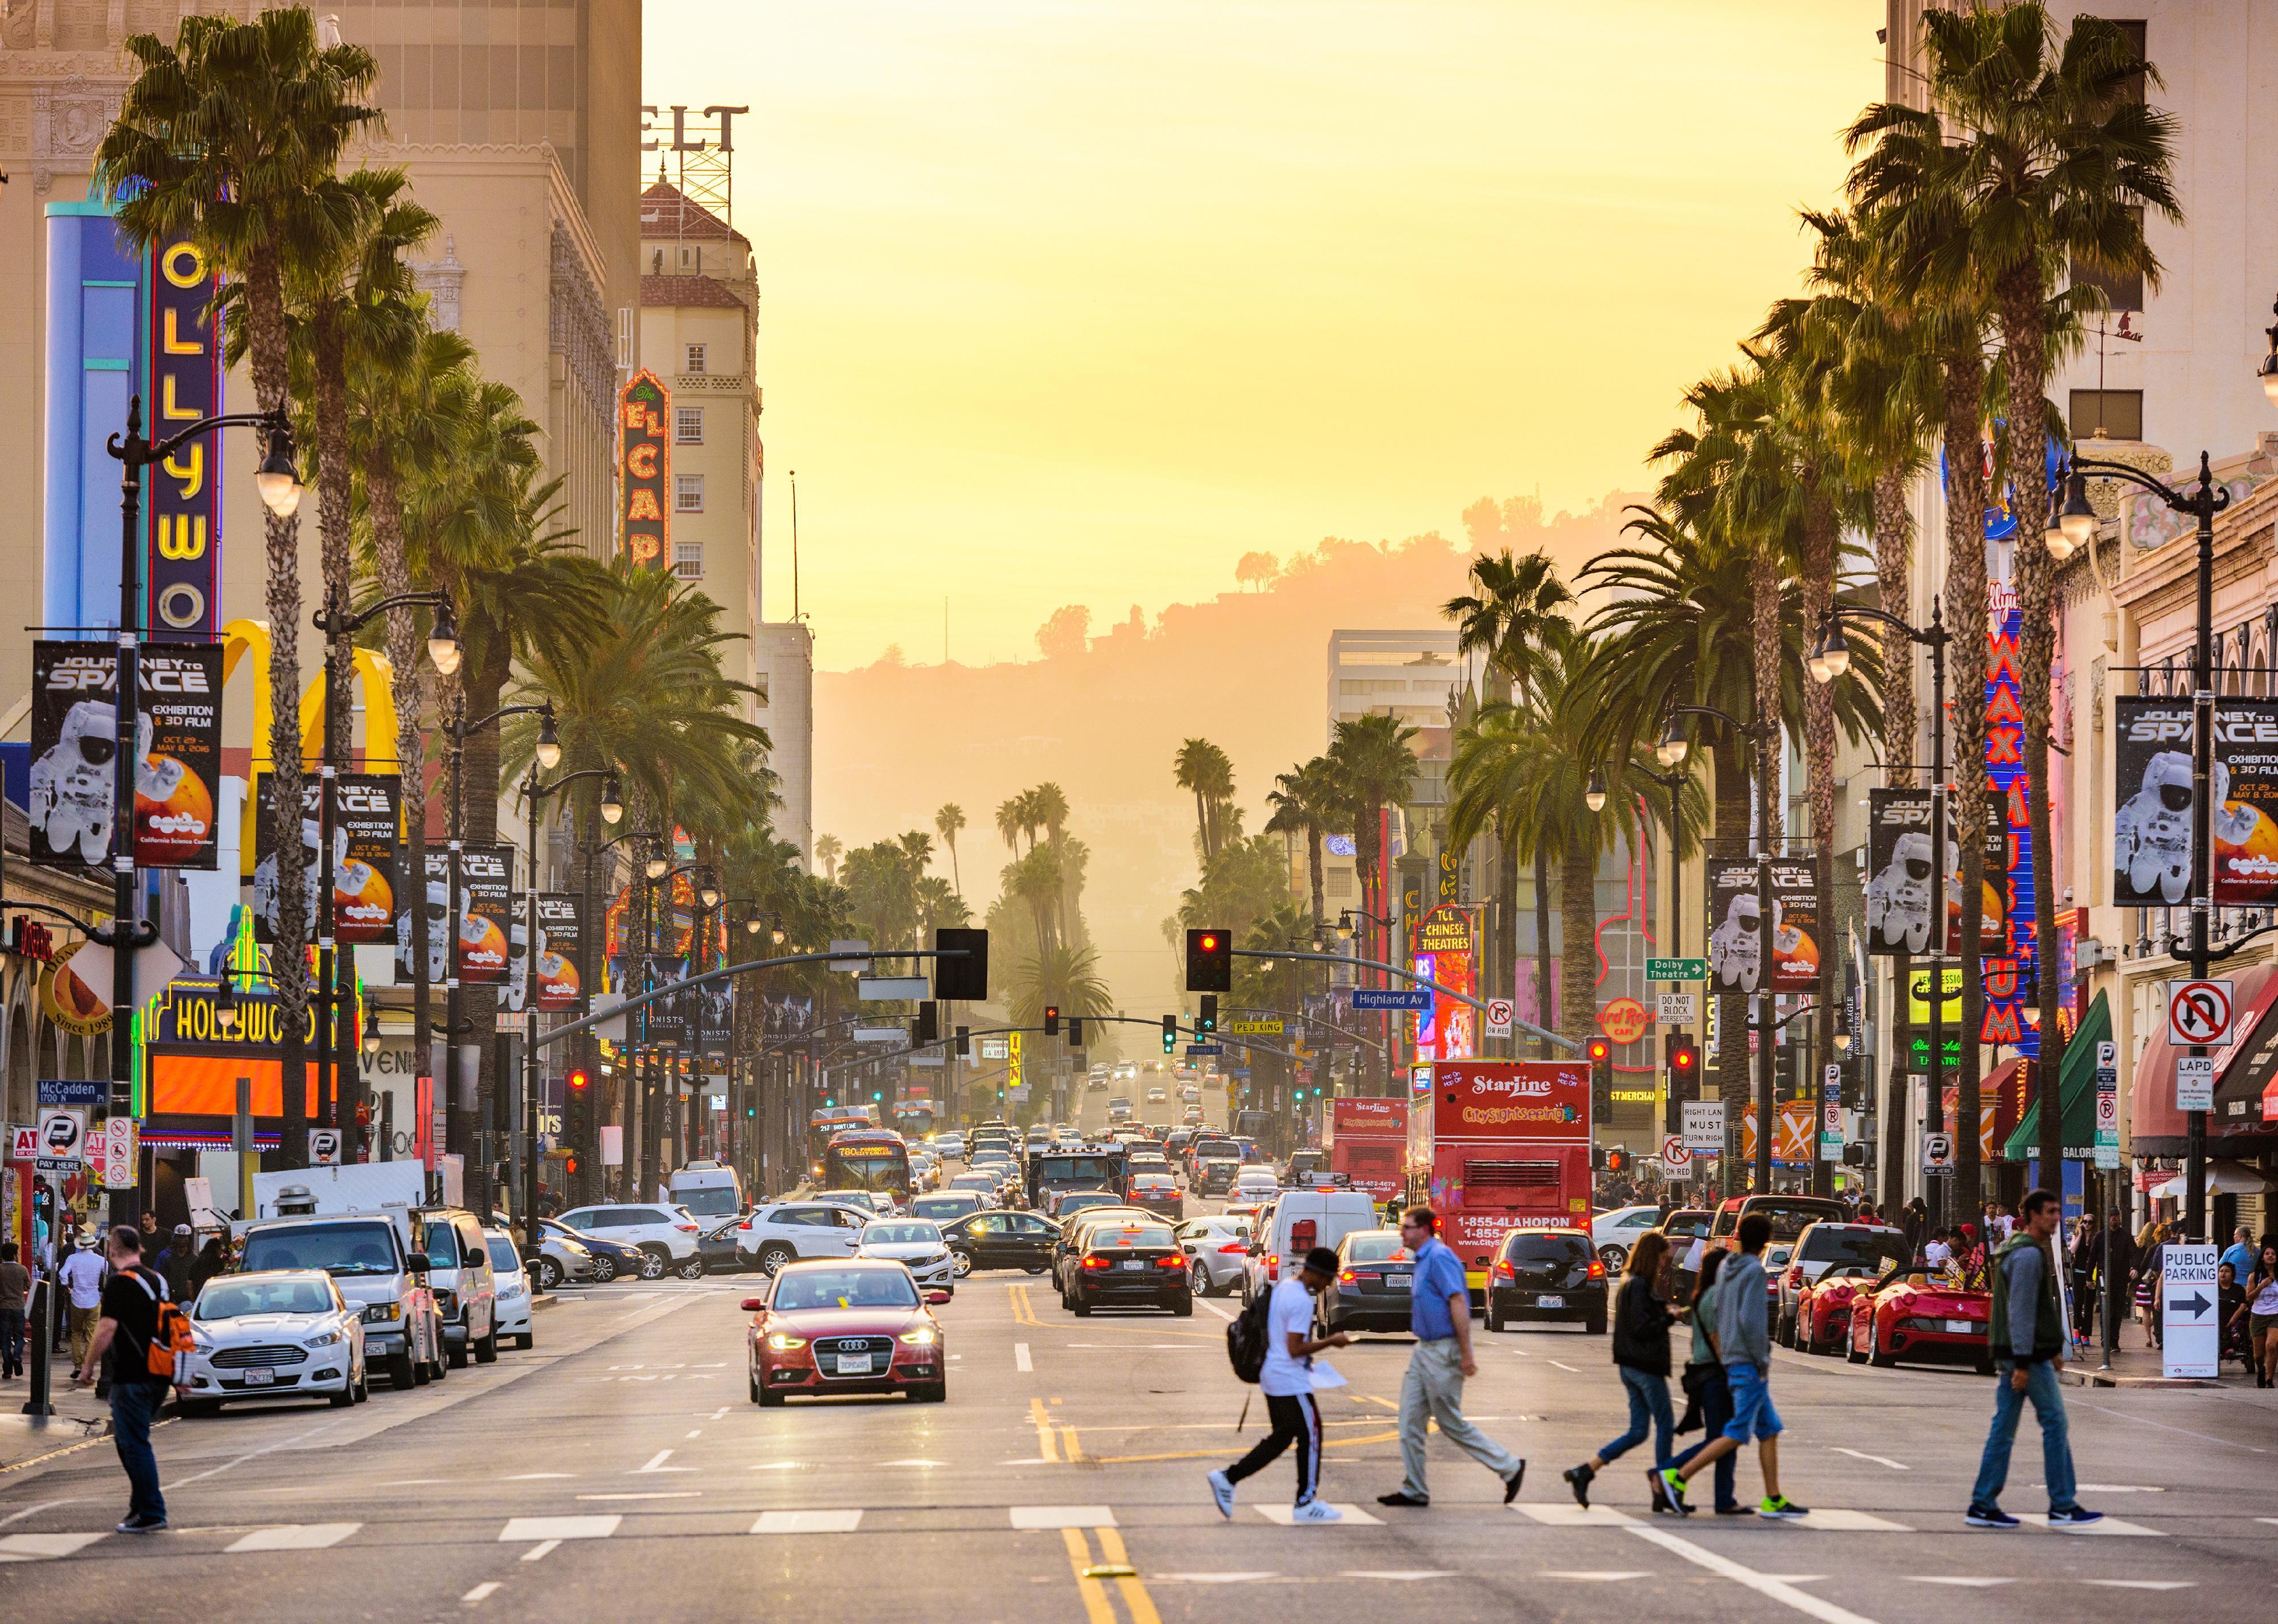 A busy street scene on Hollywood Blvd. in Los Angeles.